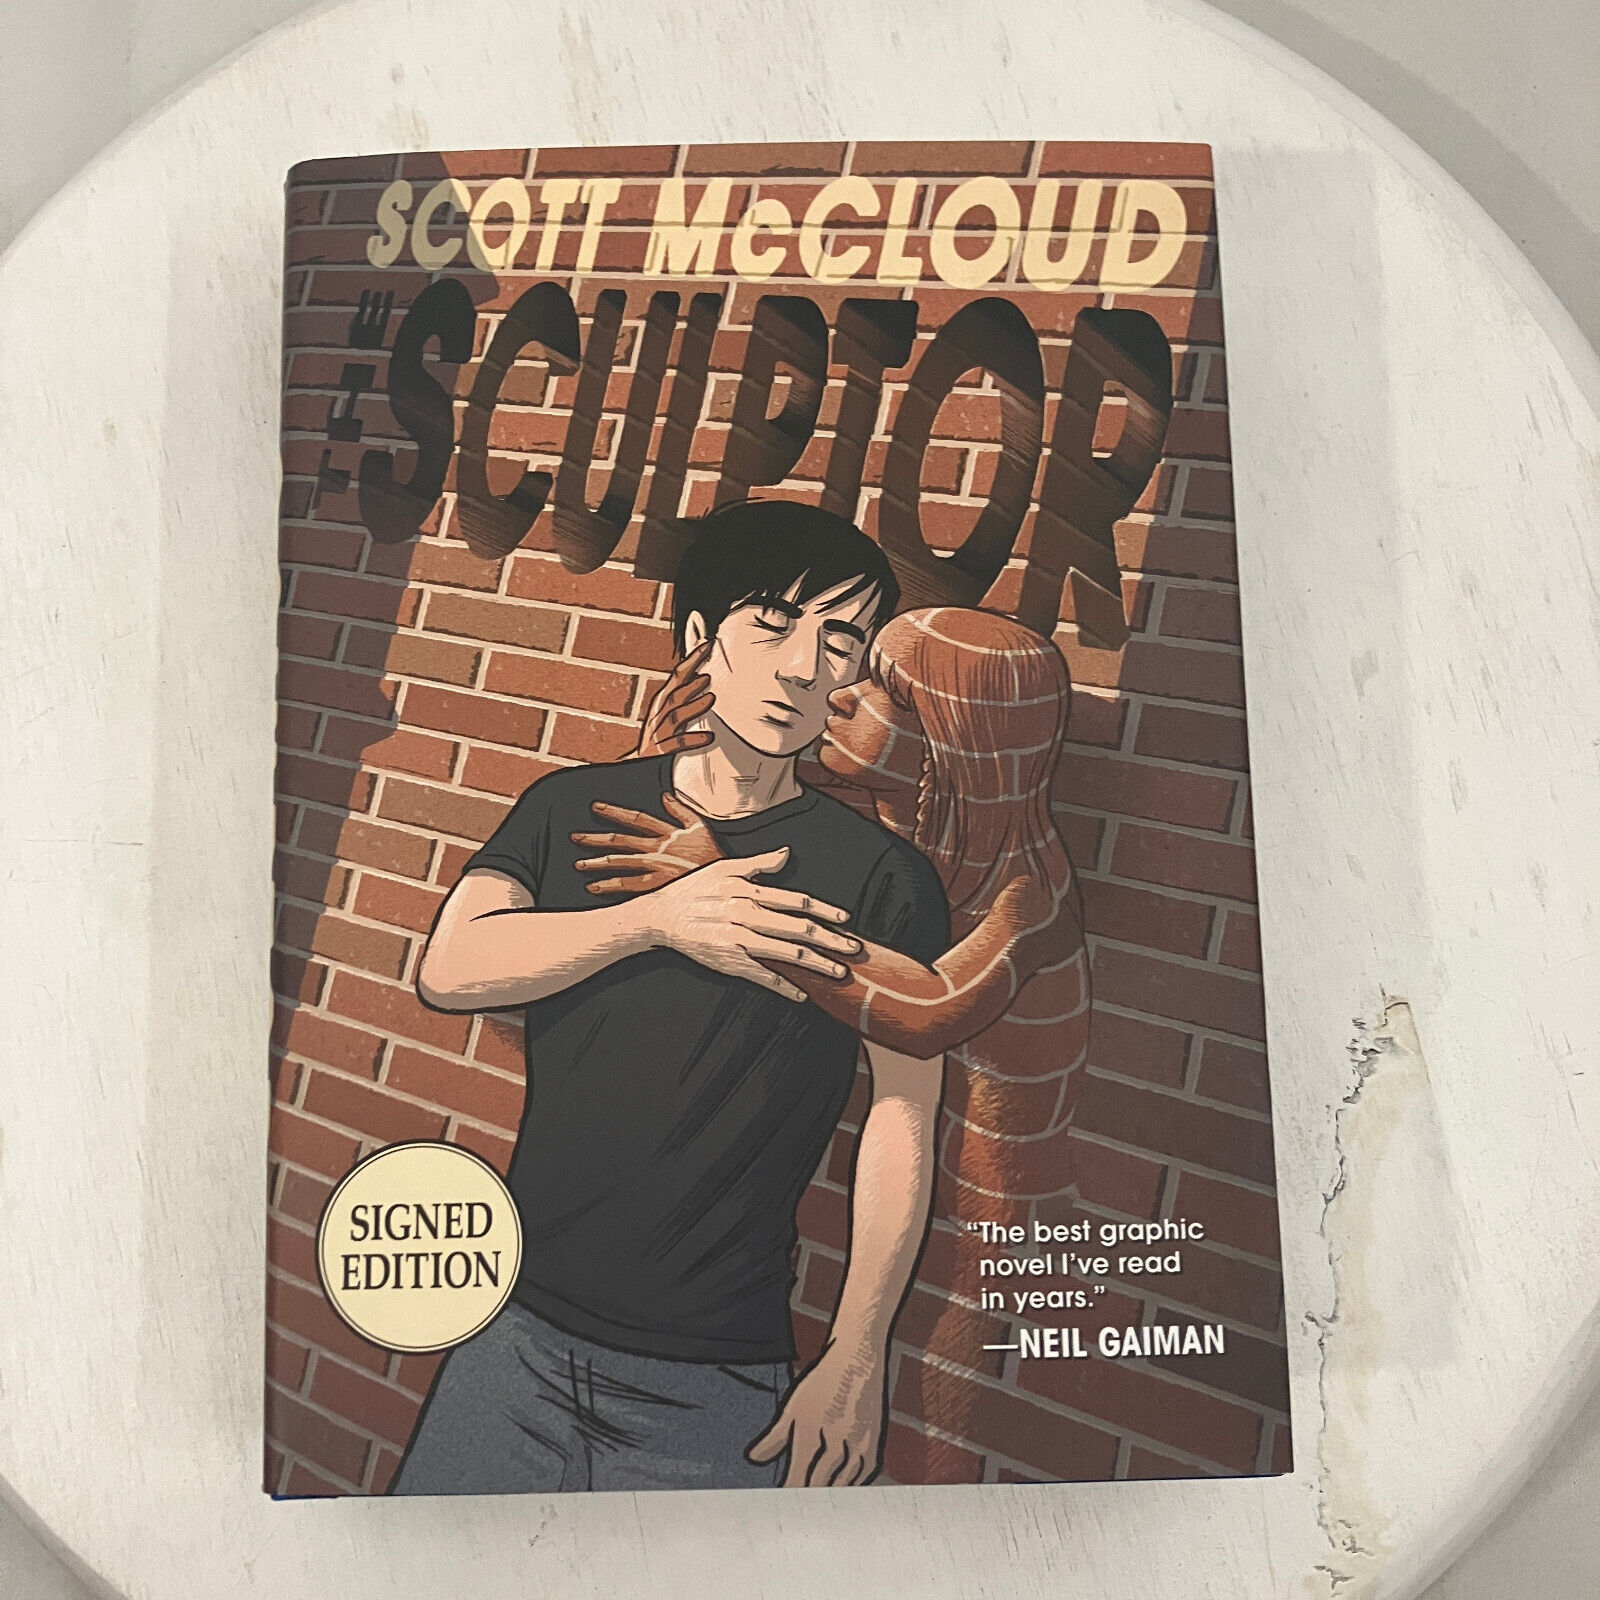 The Sculptor Signed Edition by Scott McCloud First Second 2015 HCDJ 1st Printing